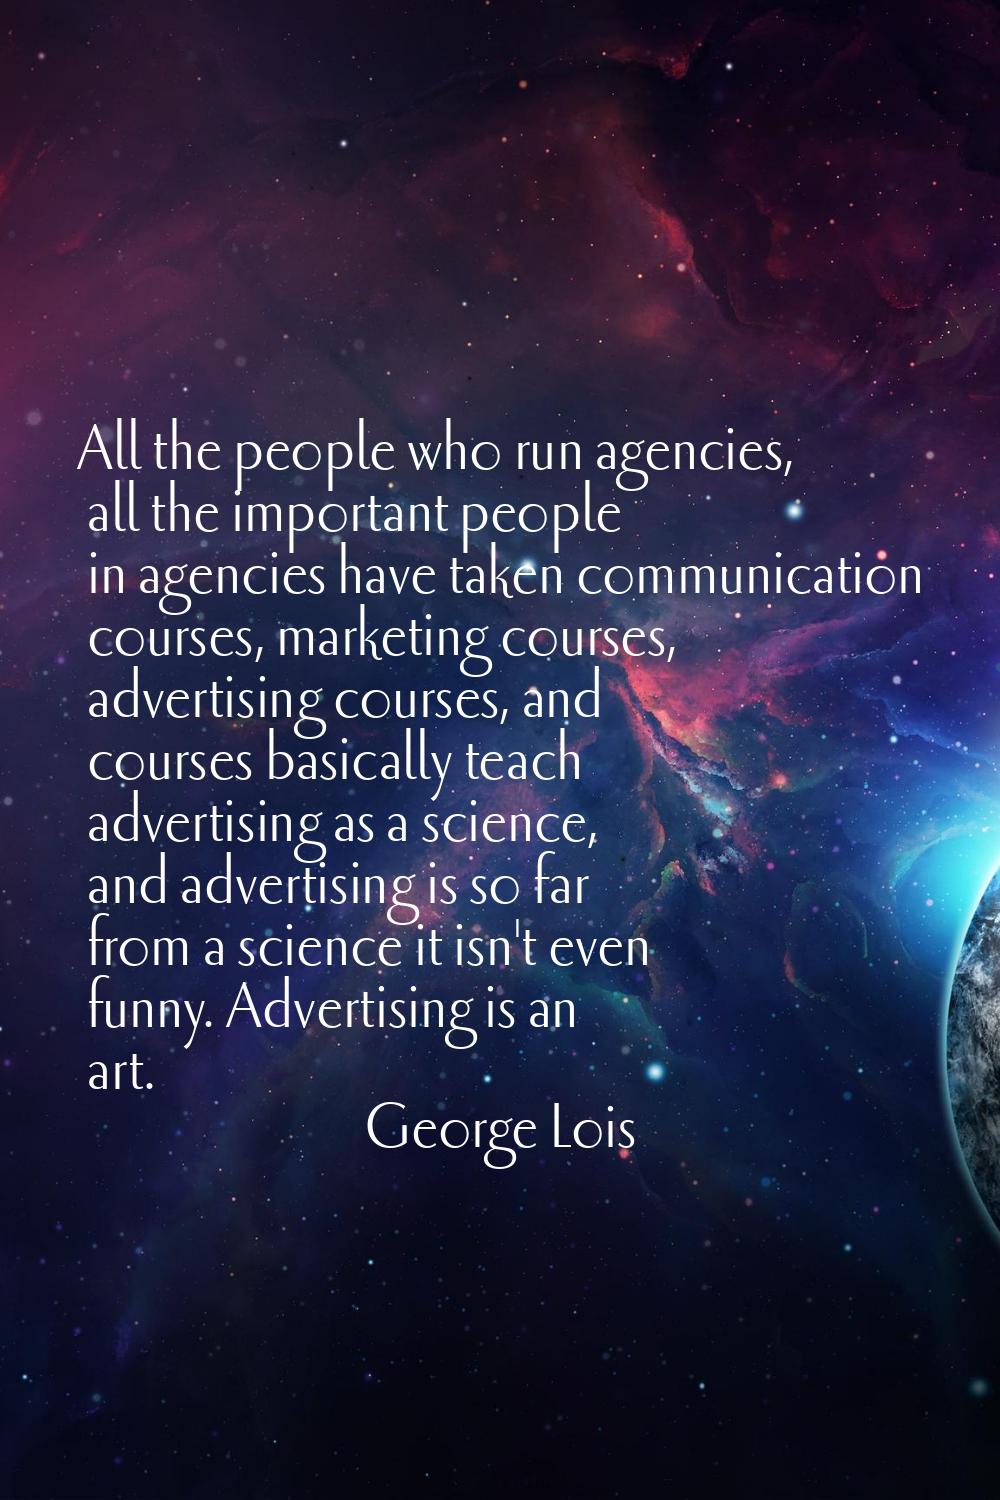 All the people who run agencies, all the important people in agencies have taken communication cour